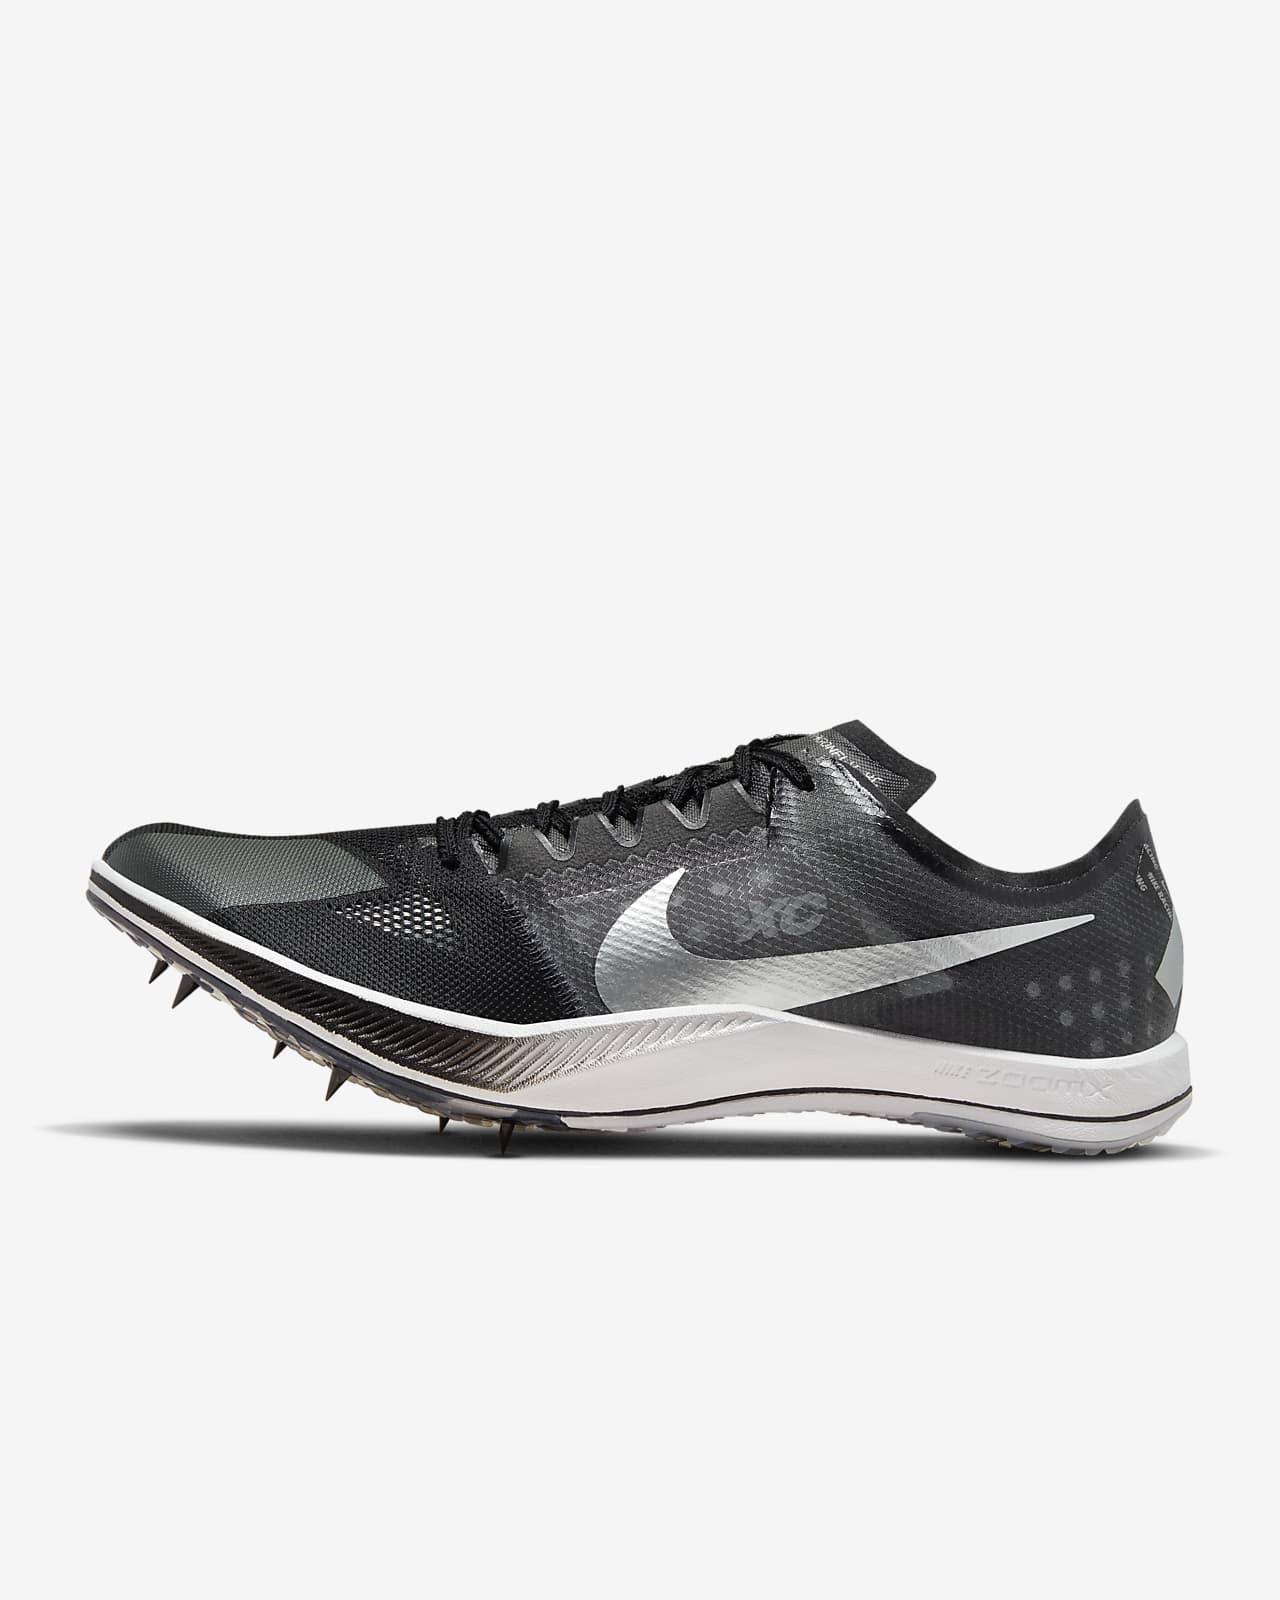 Chaussure de cross-country à pointes Nike Zoom Dragonfly XC